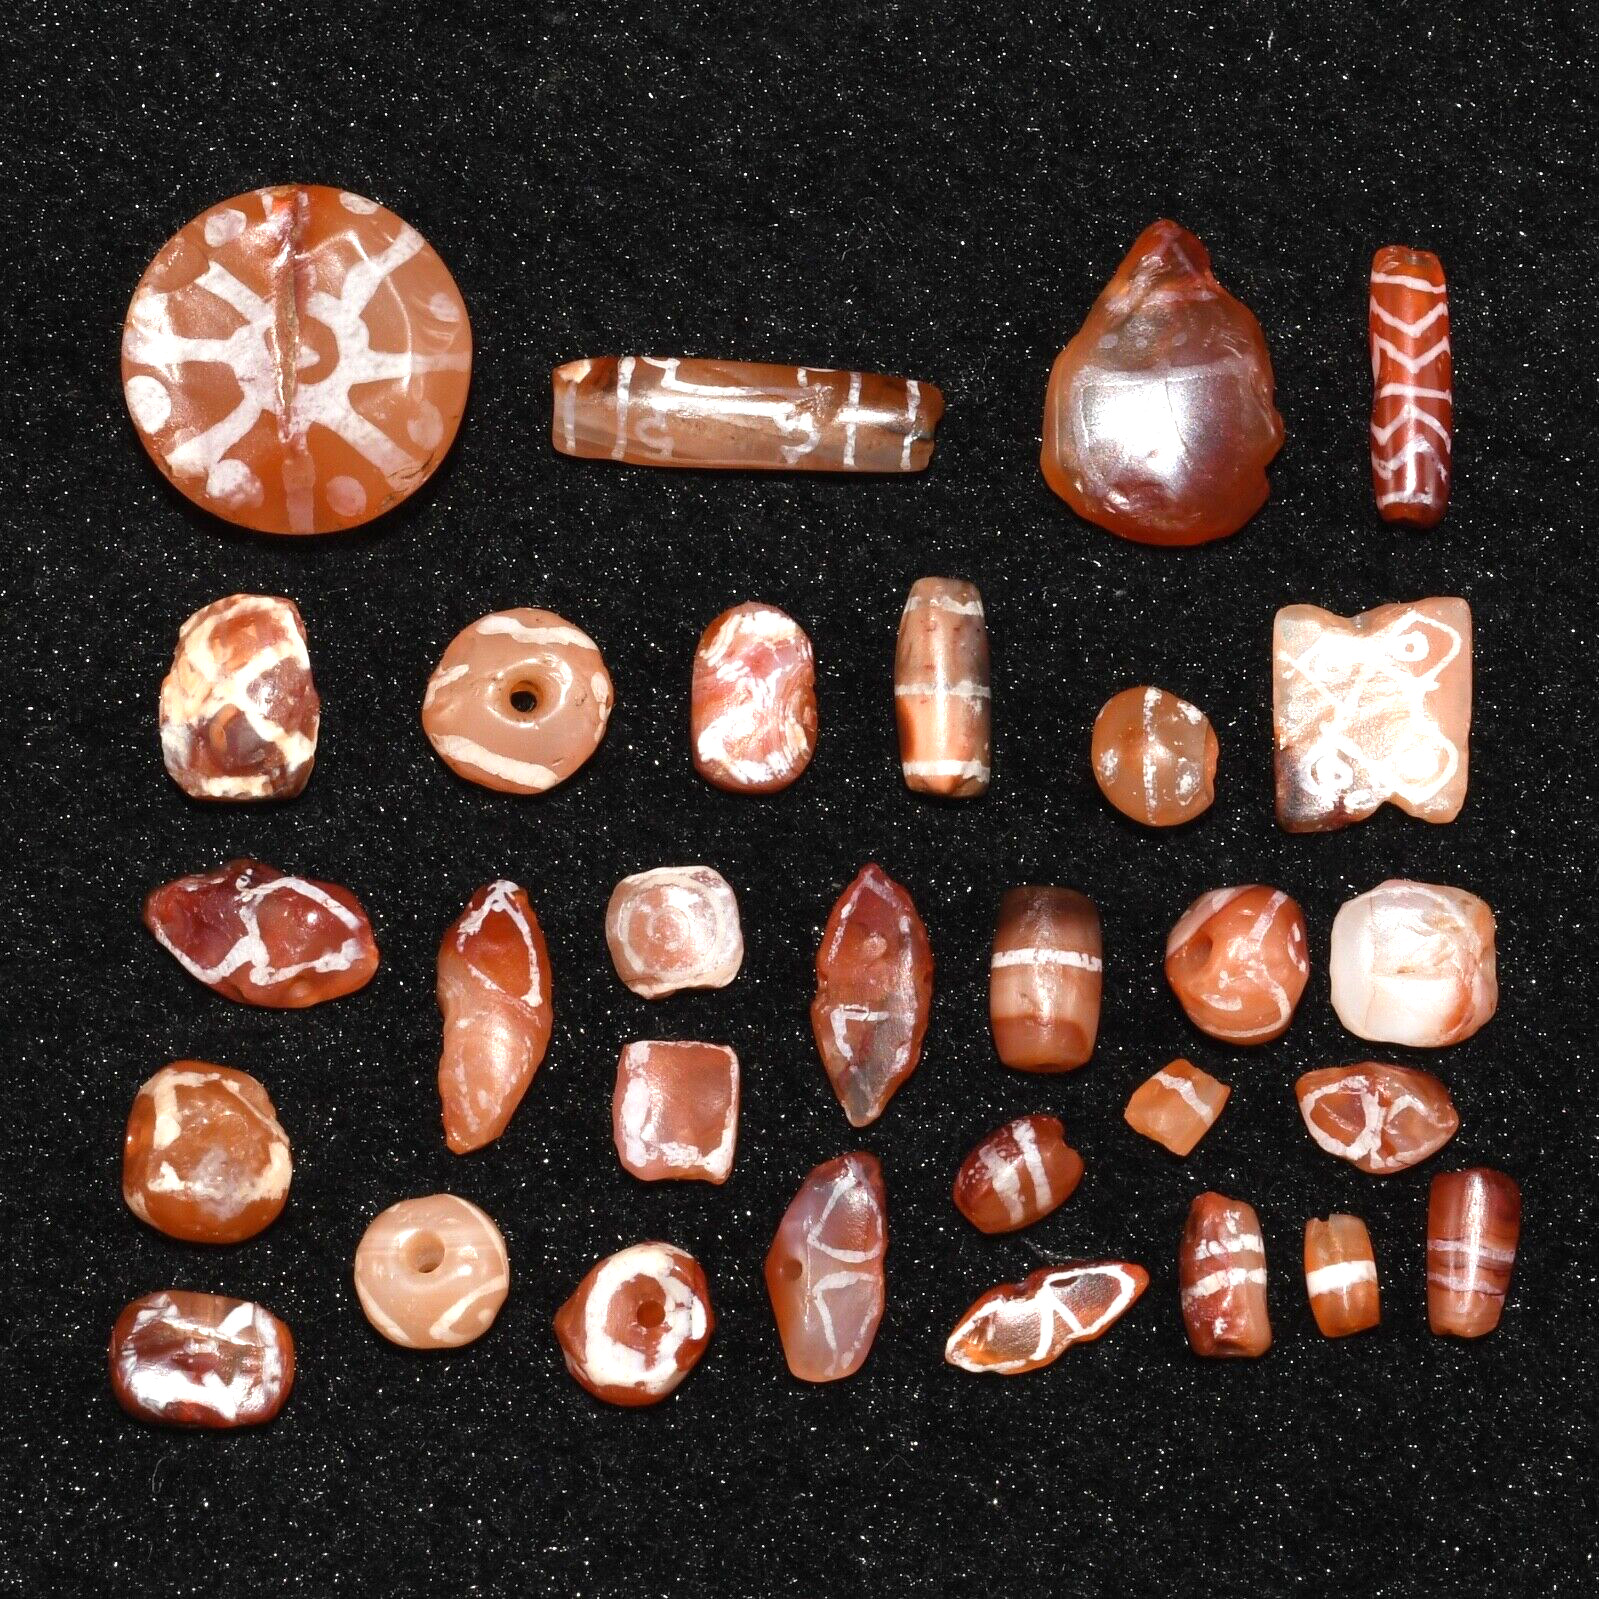 30 Genuine Ancient Near Eastern Etched Carnelian Beads over 1000 Years Old